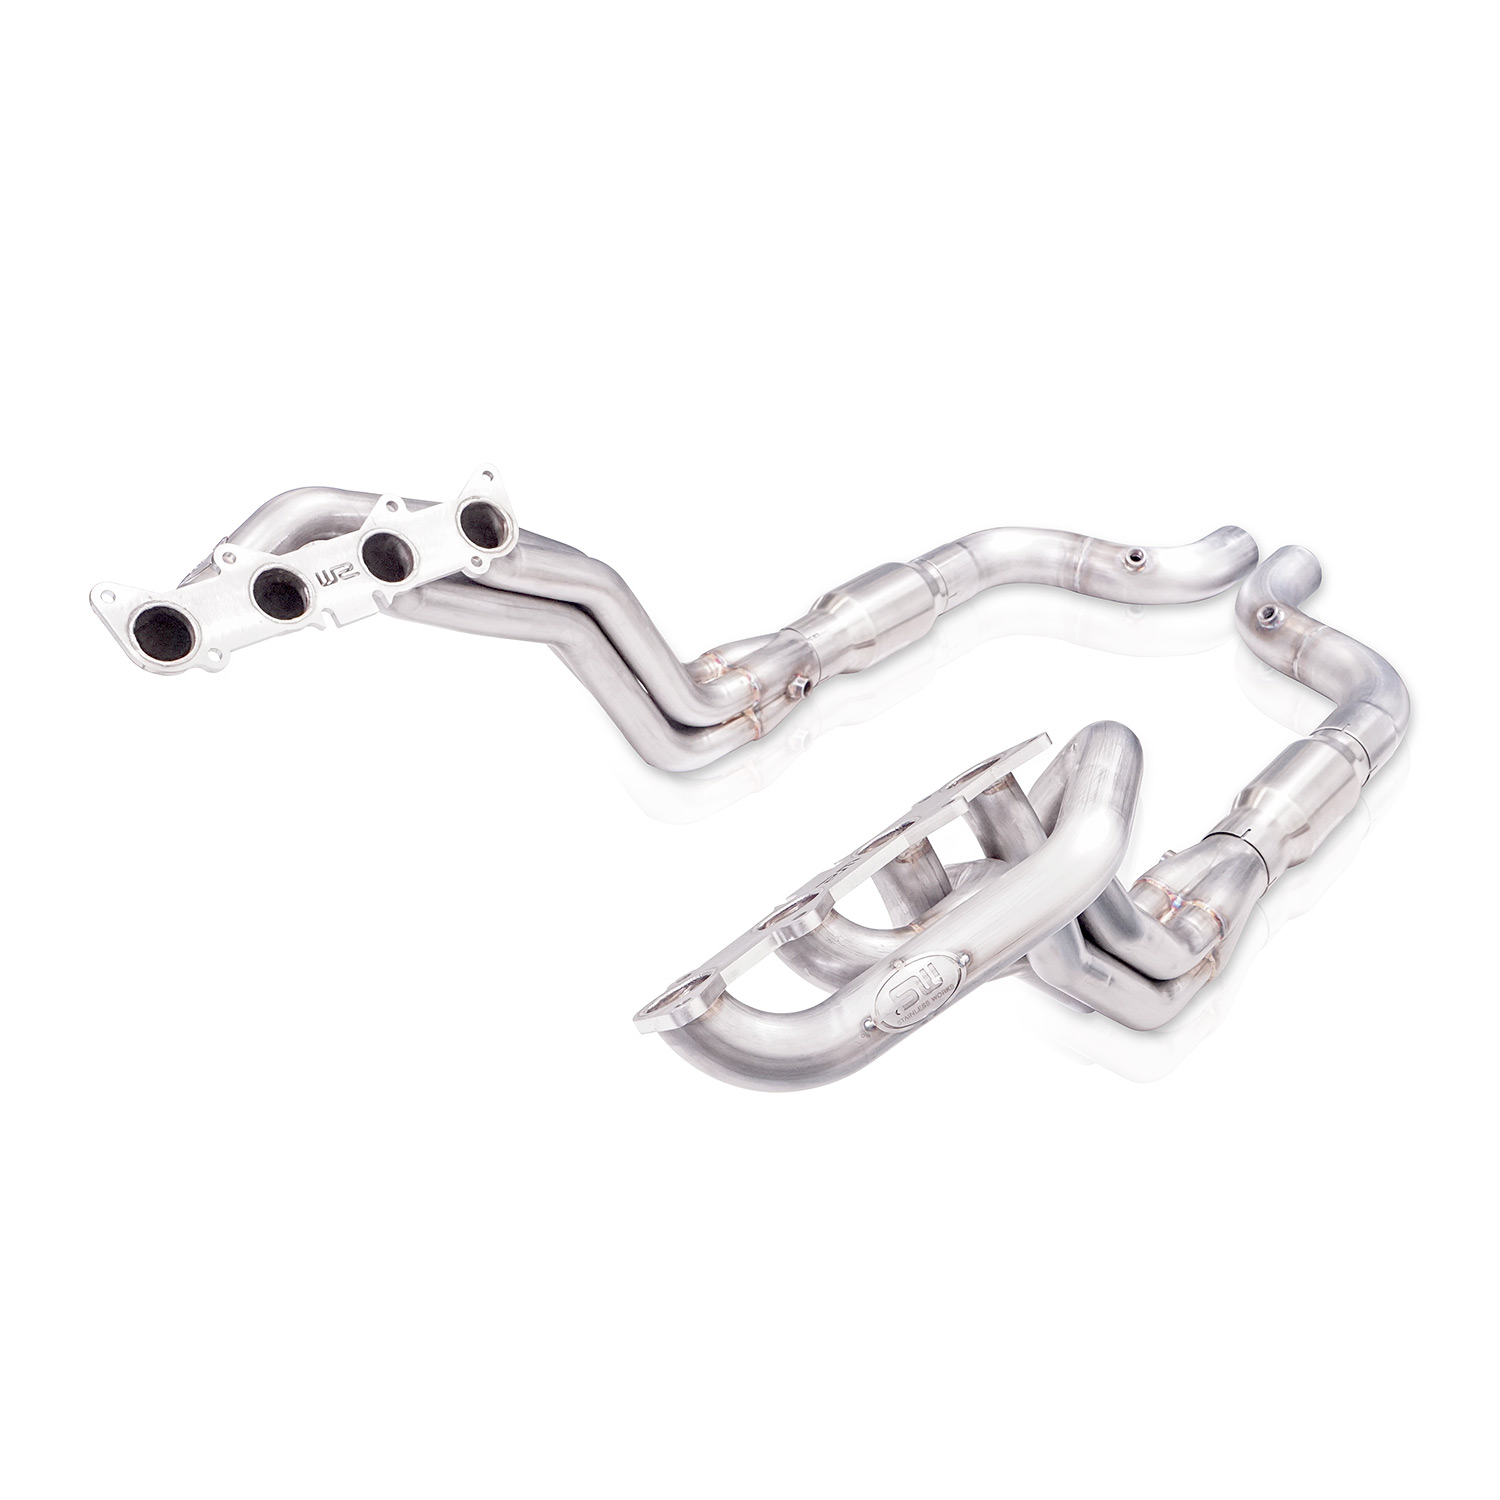 2015-2021 Mustang GT 5.0L SW Headers 2" With Catted Leads Performance Connect